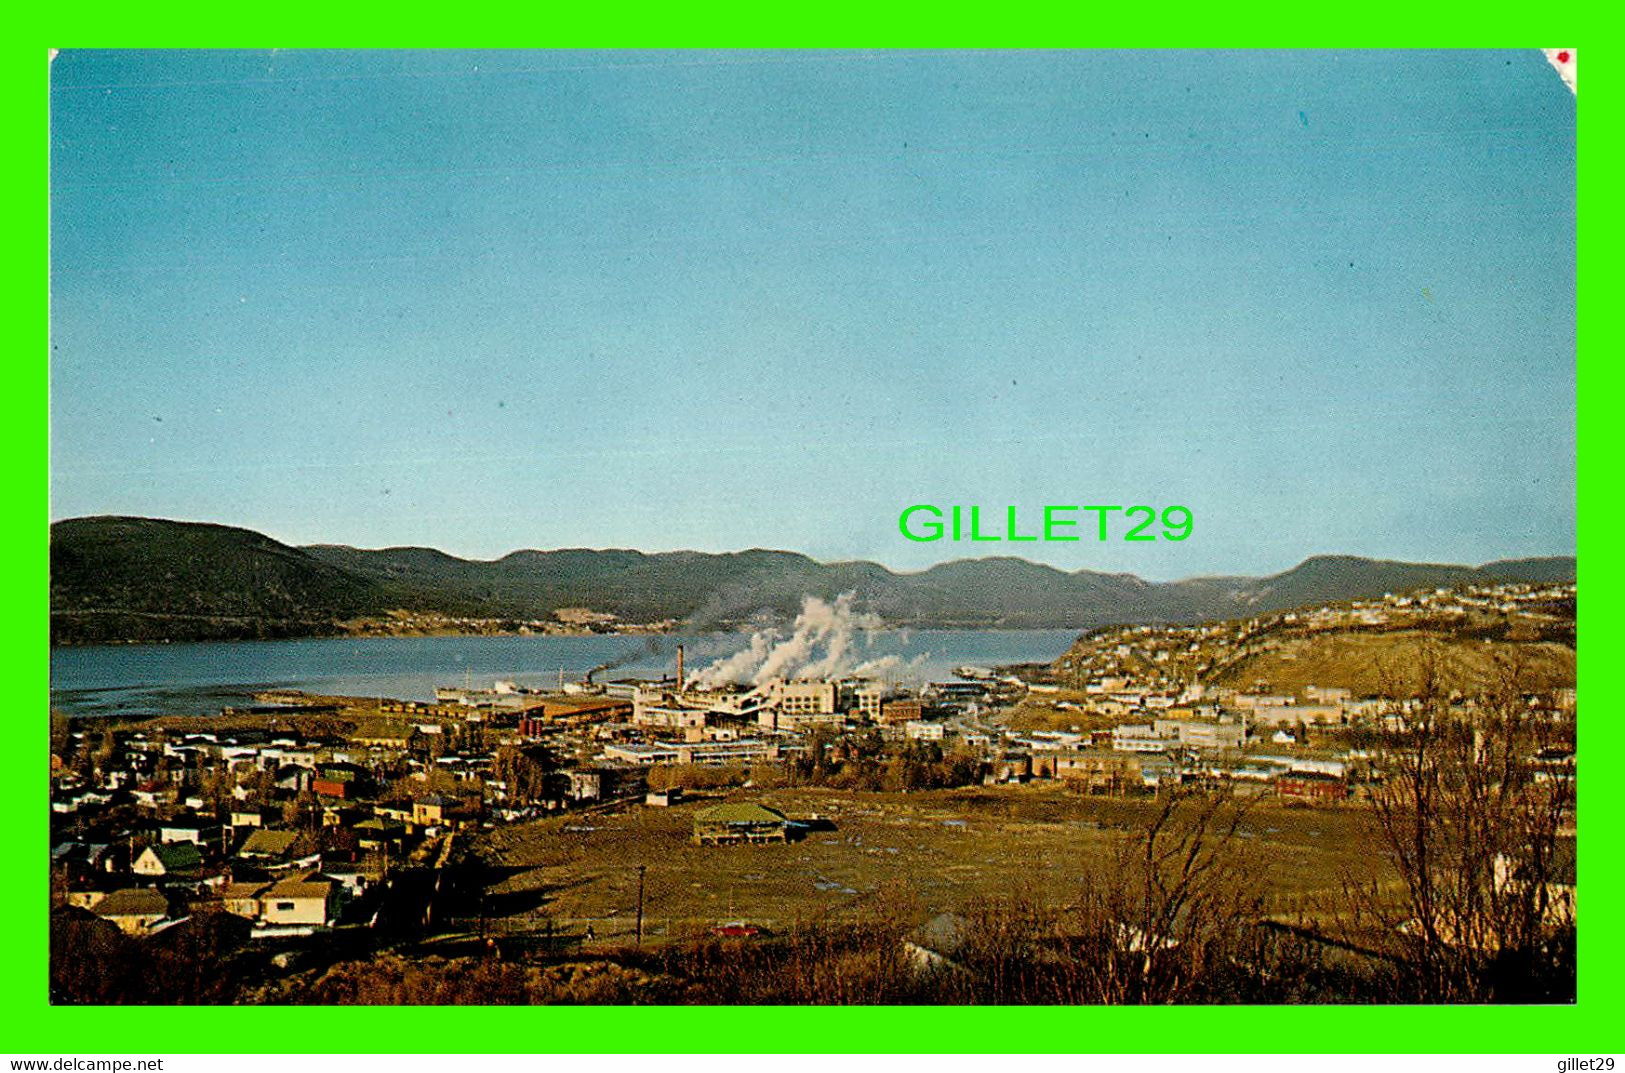 CORNER BROOK, NEW-FOUNDLAND - BOWATER'S PAPER MILL, THE CITY AND BAY OF ISLANDS - TRAVEL IN 1983 - - Sonstige & Ohne Zuordnung